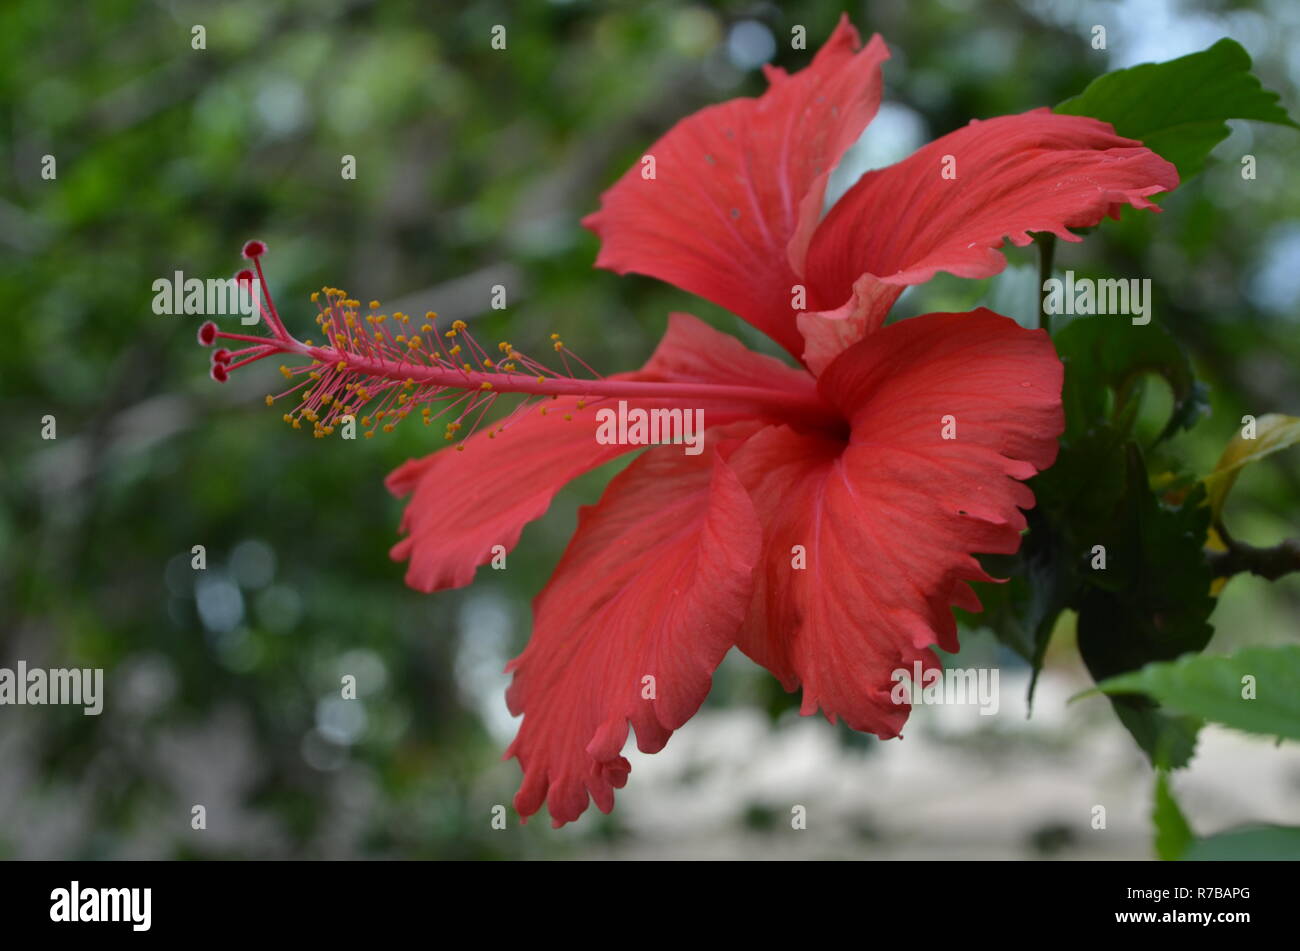 Red hibiscus flower on a green background Stock Photo